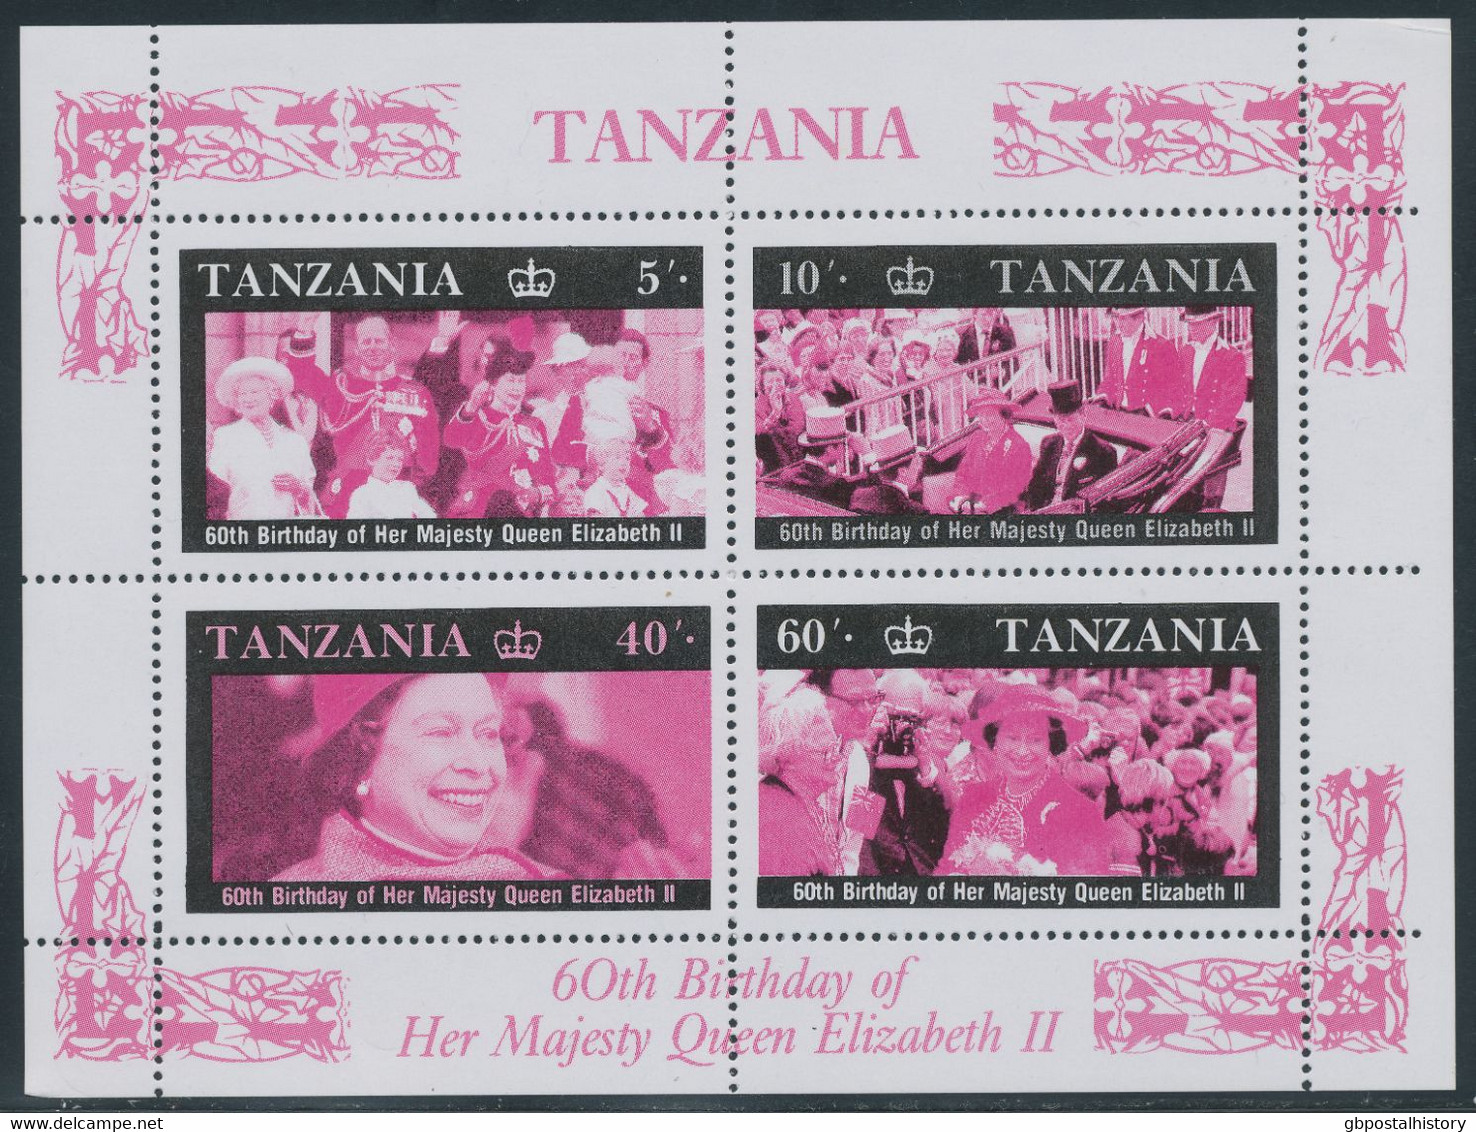 TANZANIA 1987, 60th Birthday Of Queen Elizabeth II, MAJOR VARIETY: Superb U/M MS With MISSING COLORS Yellow And Blue, - Tanzania (1964-...)